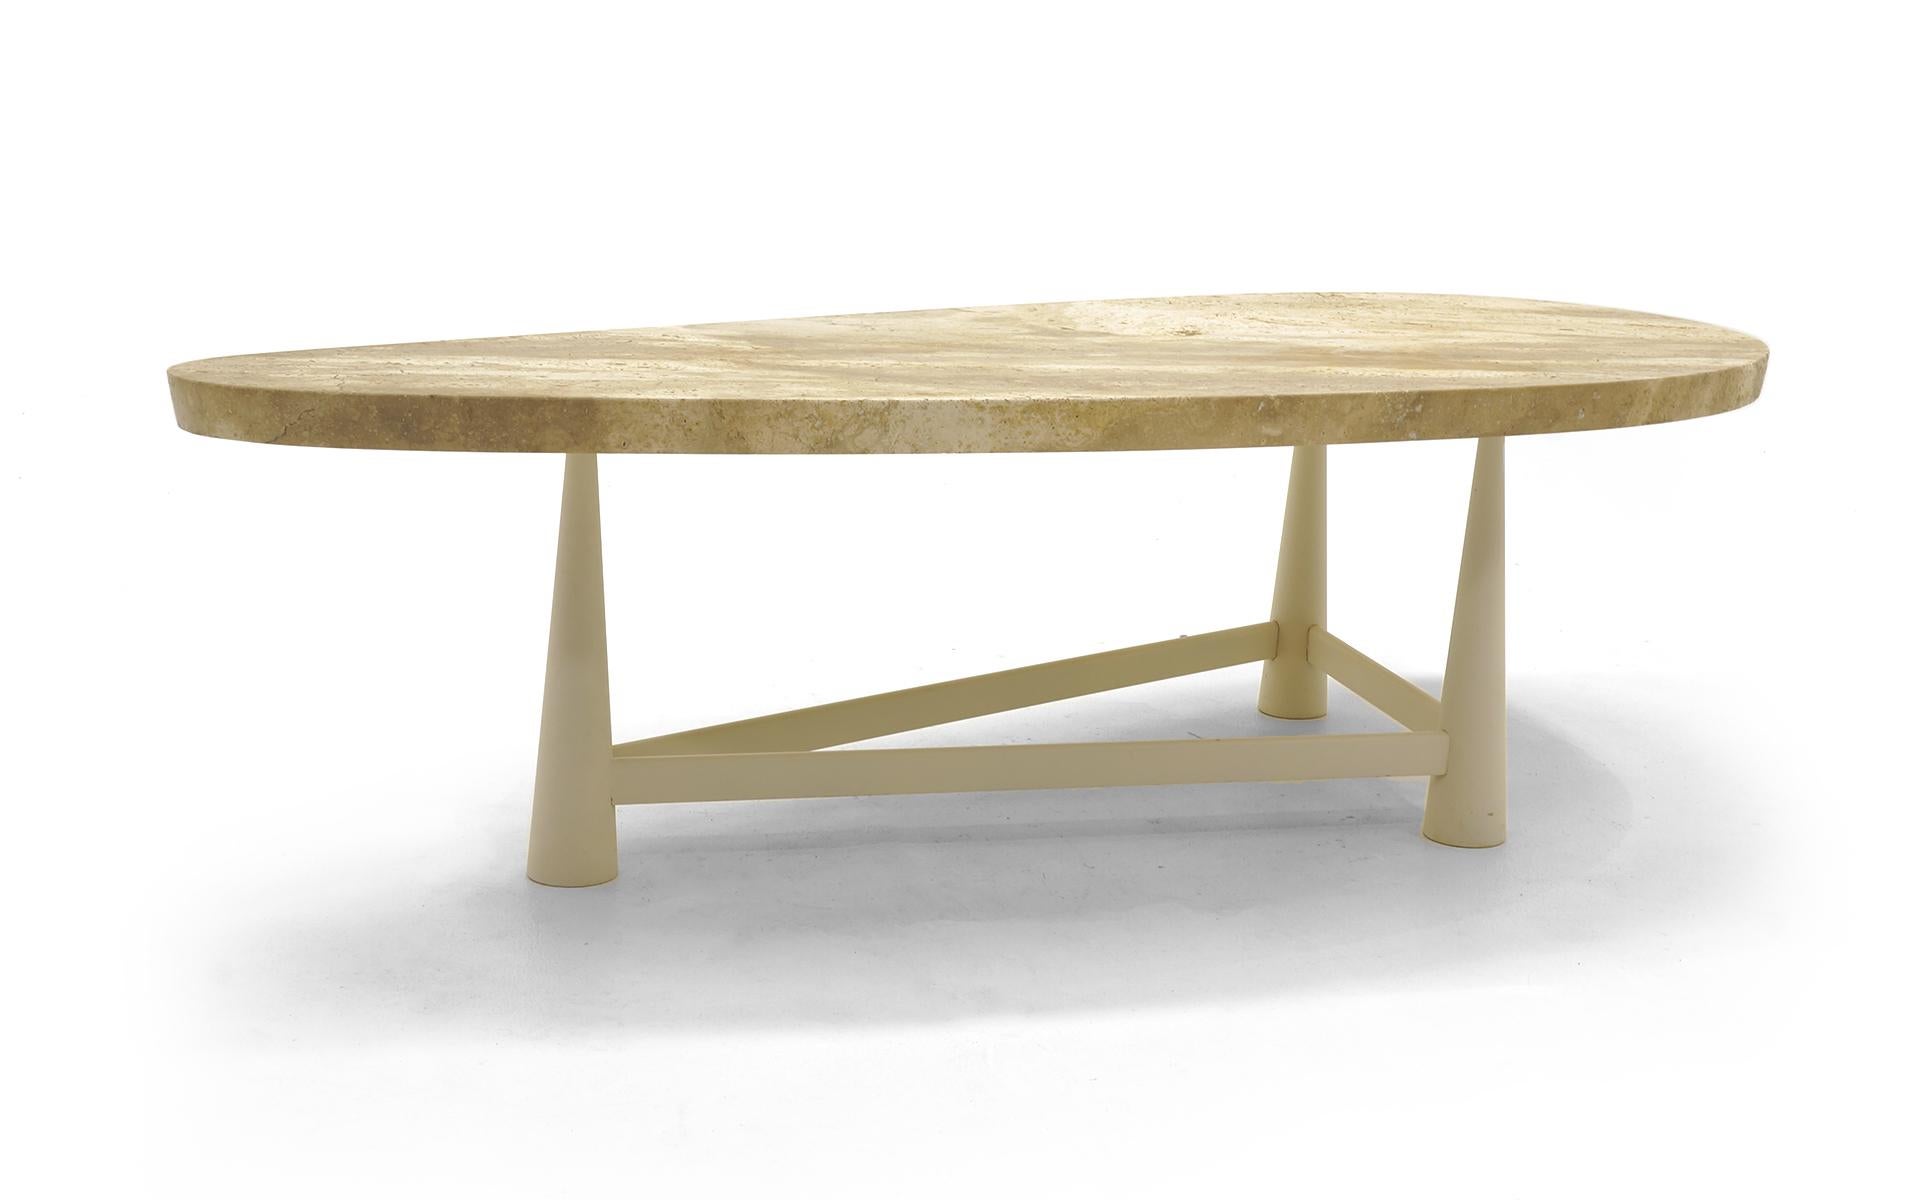 Rare, original coffee table by Edward Wormley's for Dunbar. The model 521 features a 1.75 inch thick travertine top with openings on the underside for secure, perfect placement on the base every time. The base is made of lacquered aluminum in the